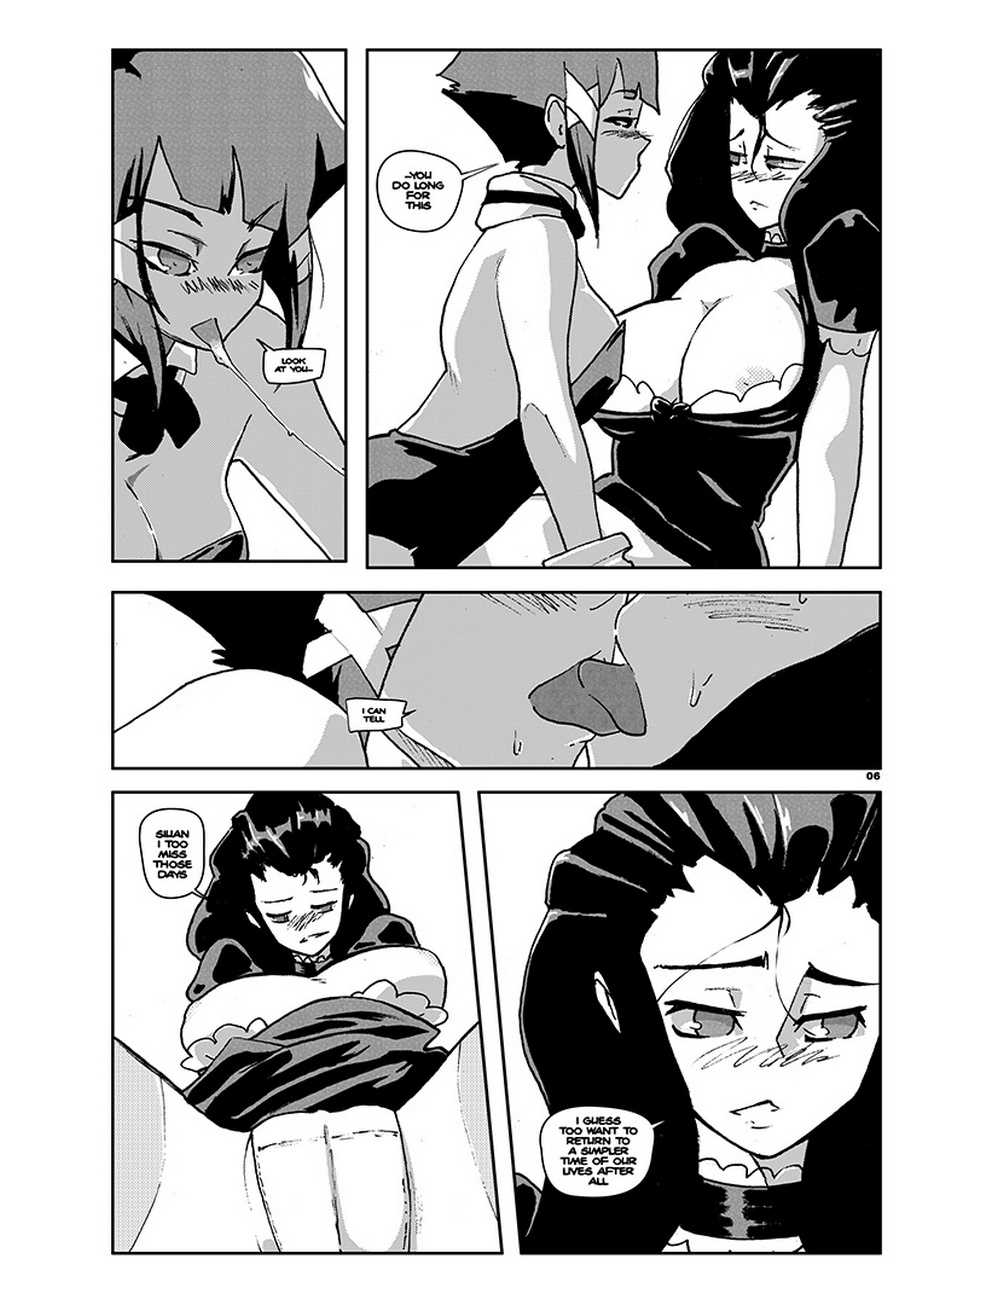 Lusting After Blue Sedai 1 page 7